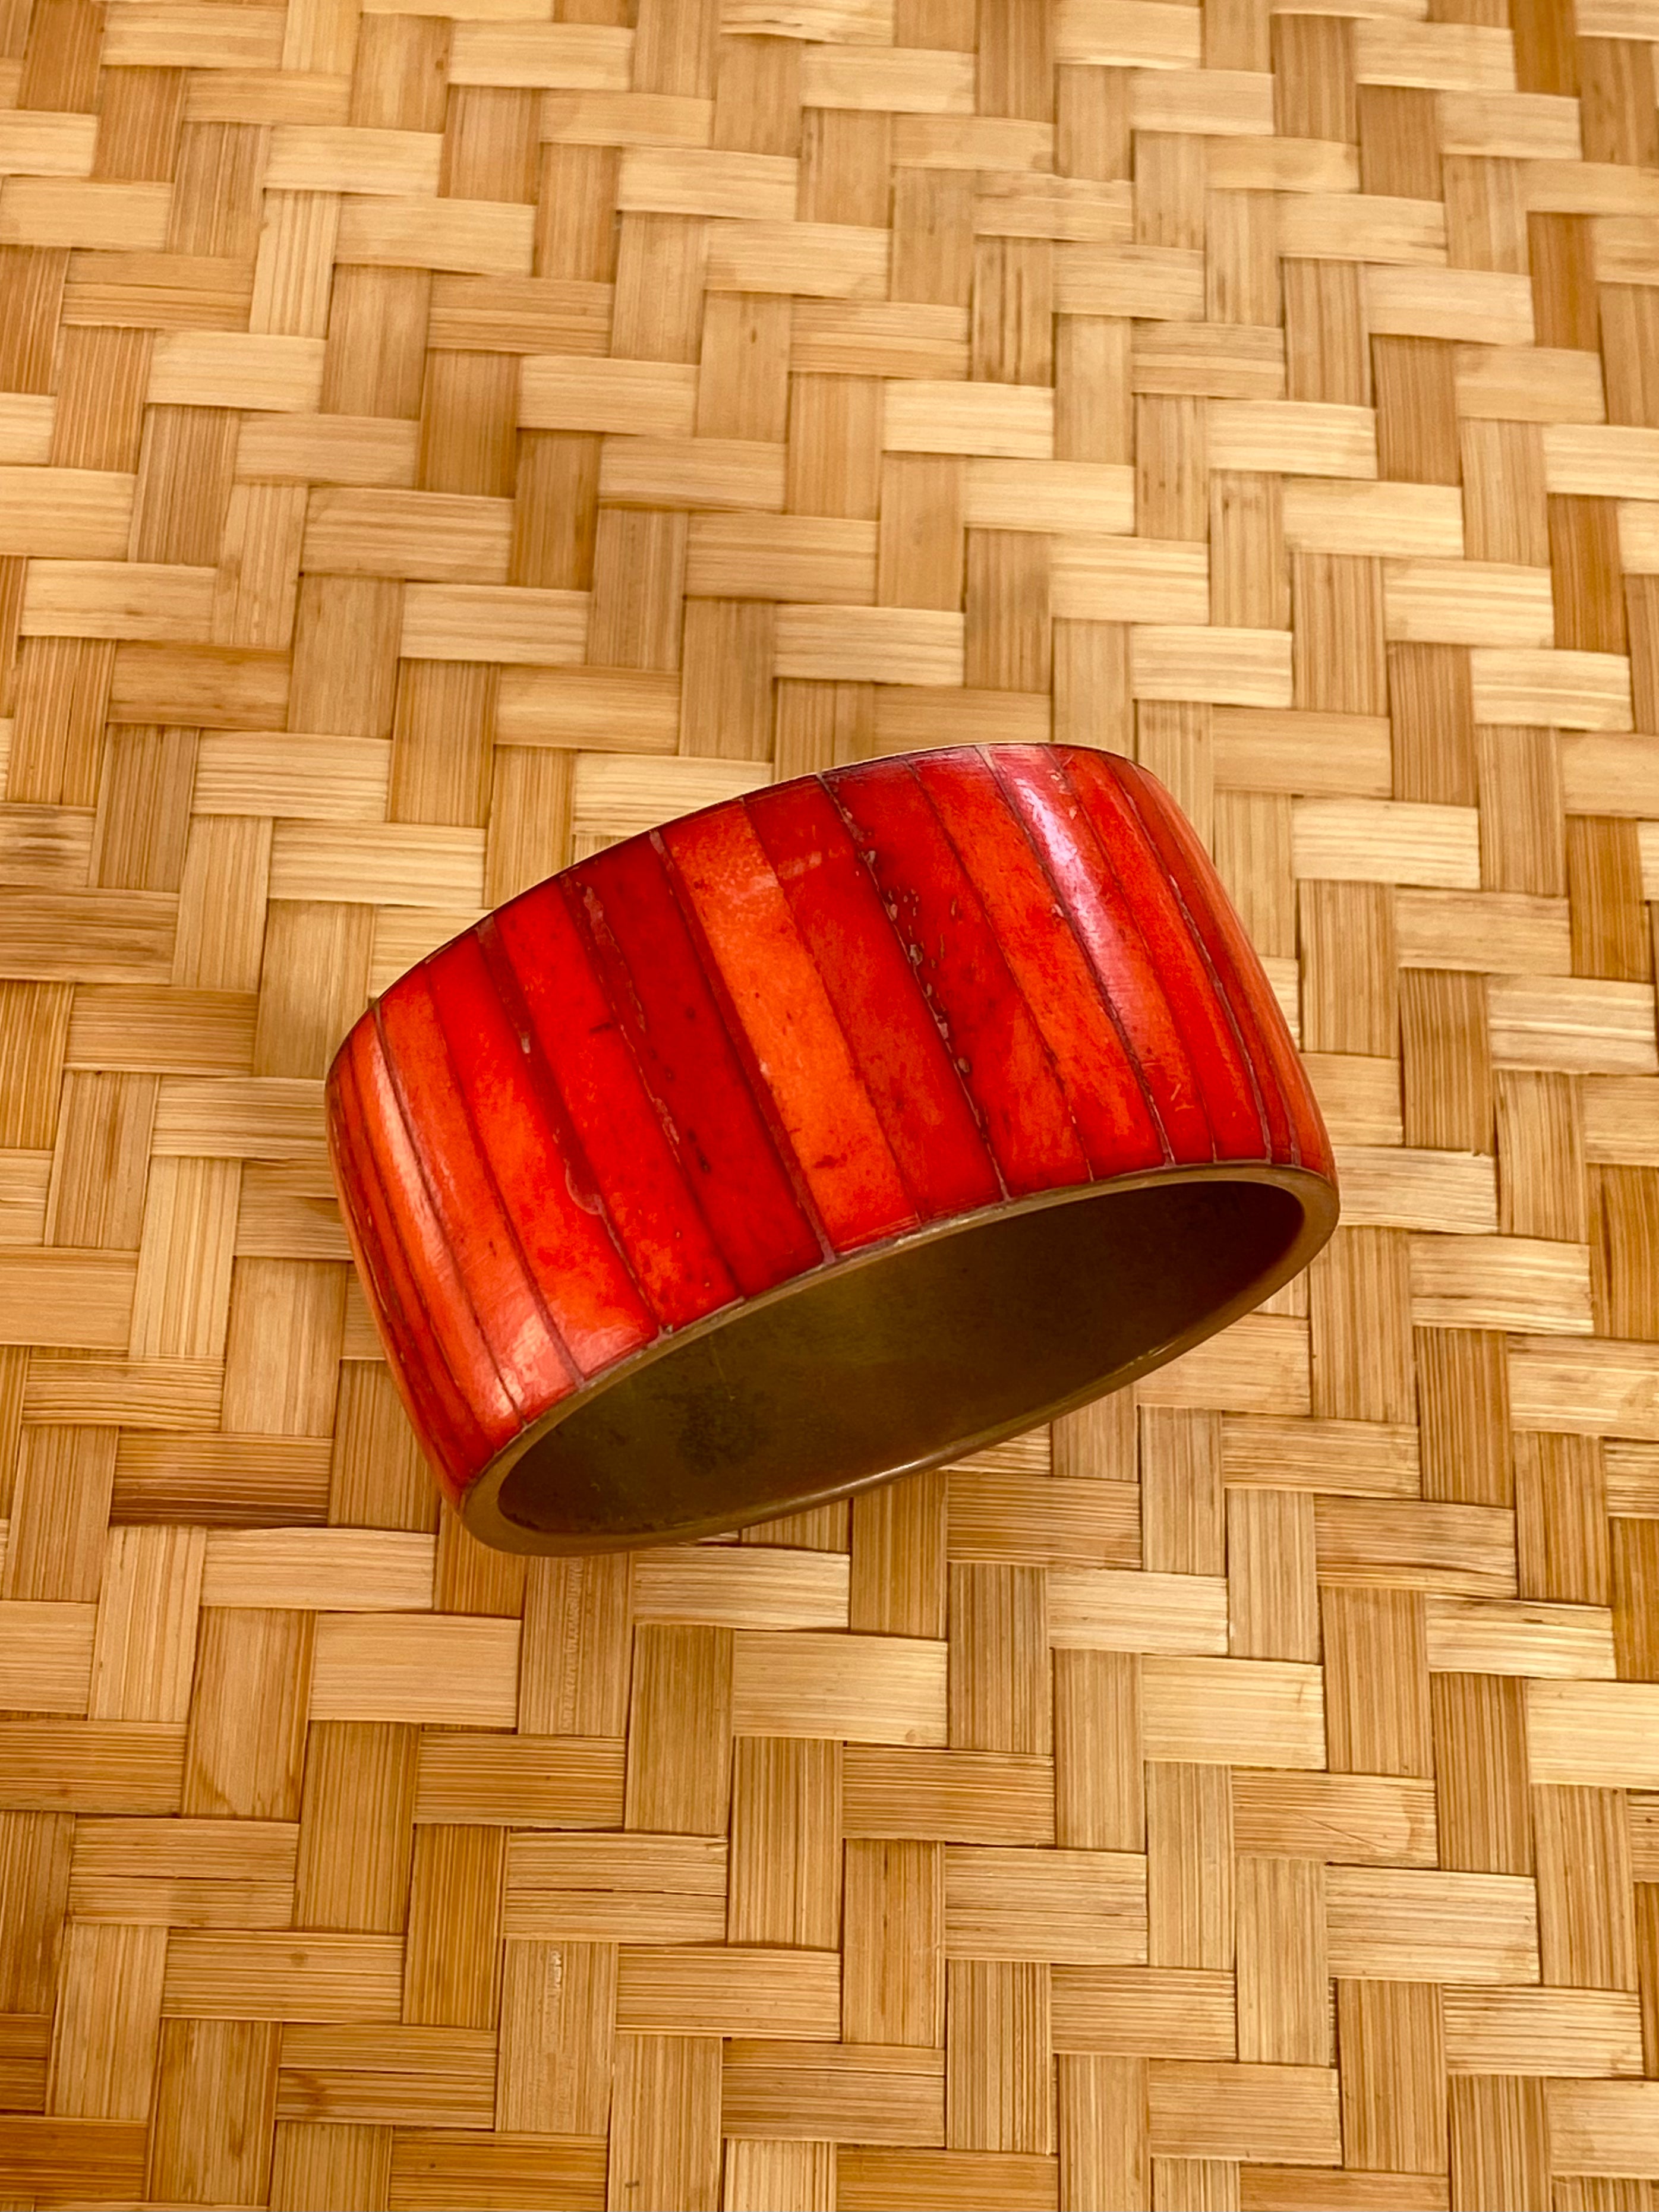 Red Coral Bangle